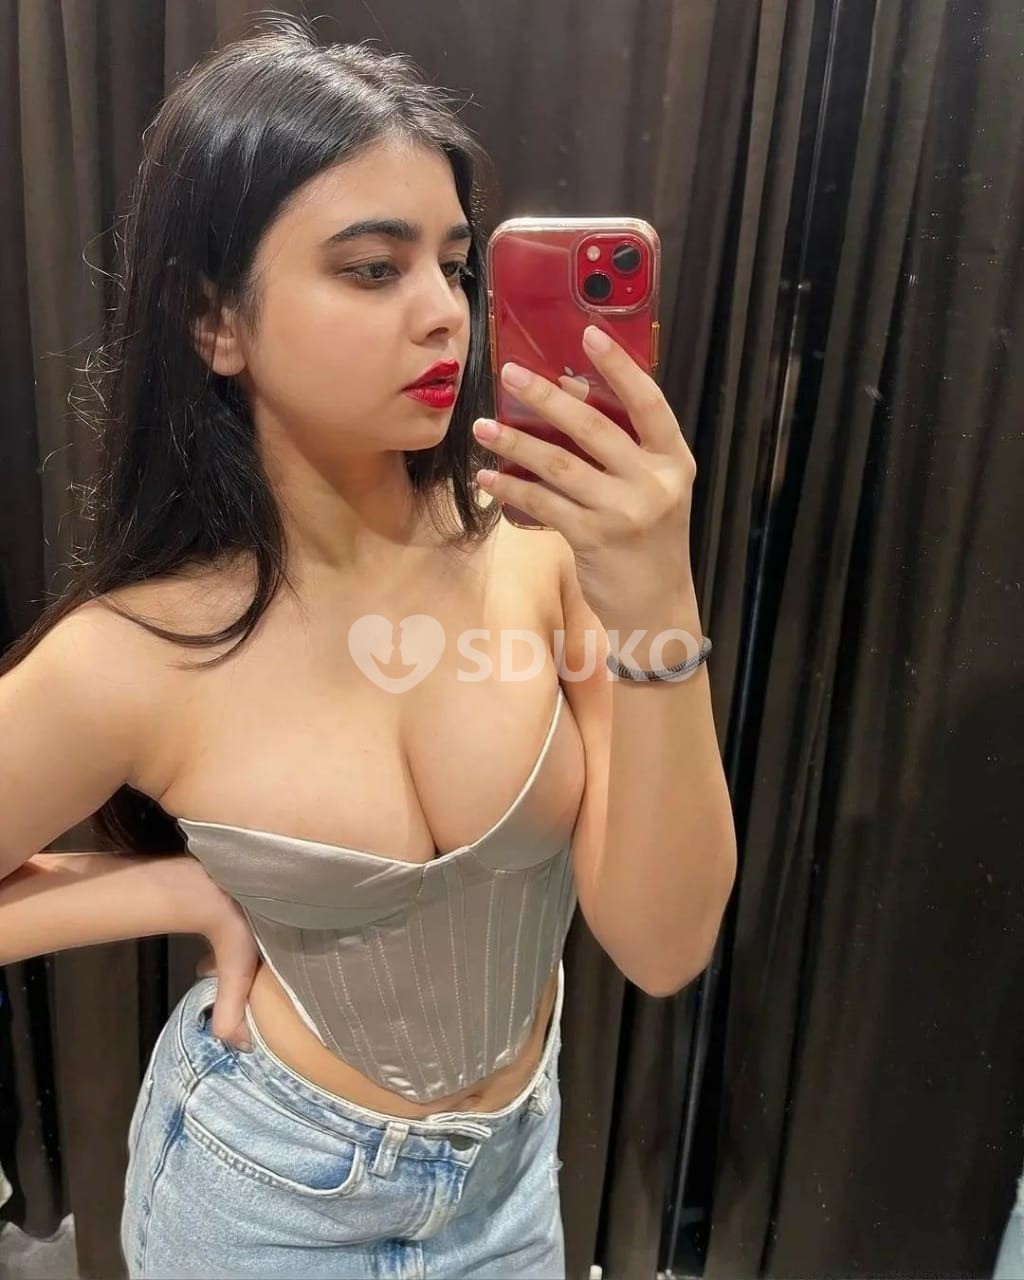 PUNE ALL AREA VIP TODAY !;LOW PRICE ESCORT 🥰SERVICE 100% SAFE AND SECURE ANYTIME CALL ME 24 X 7 SERVICE AVAILABLE 100